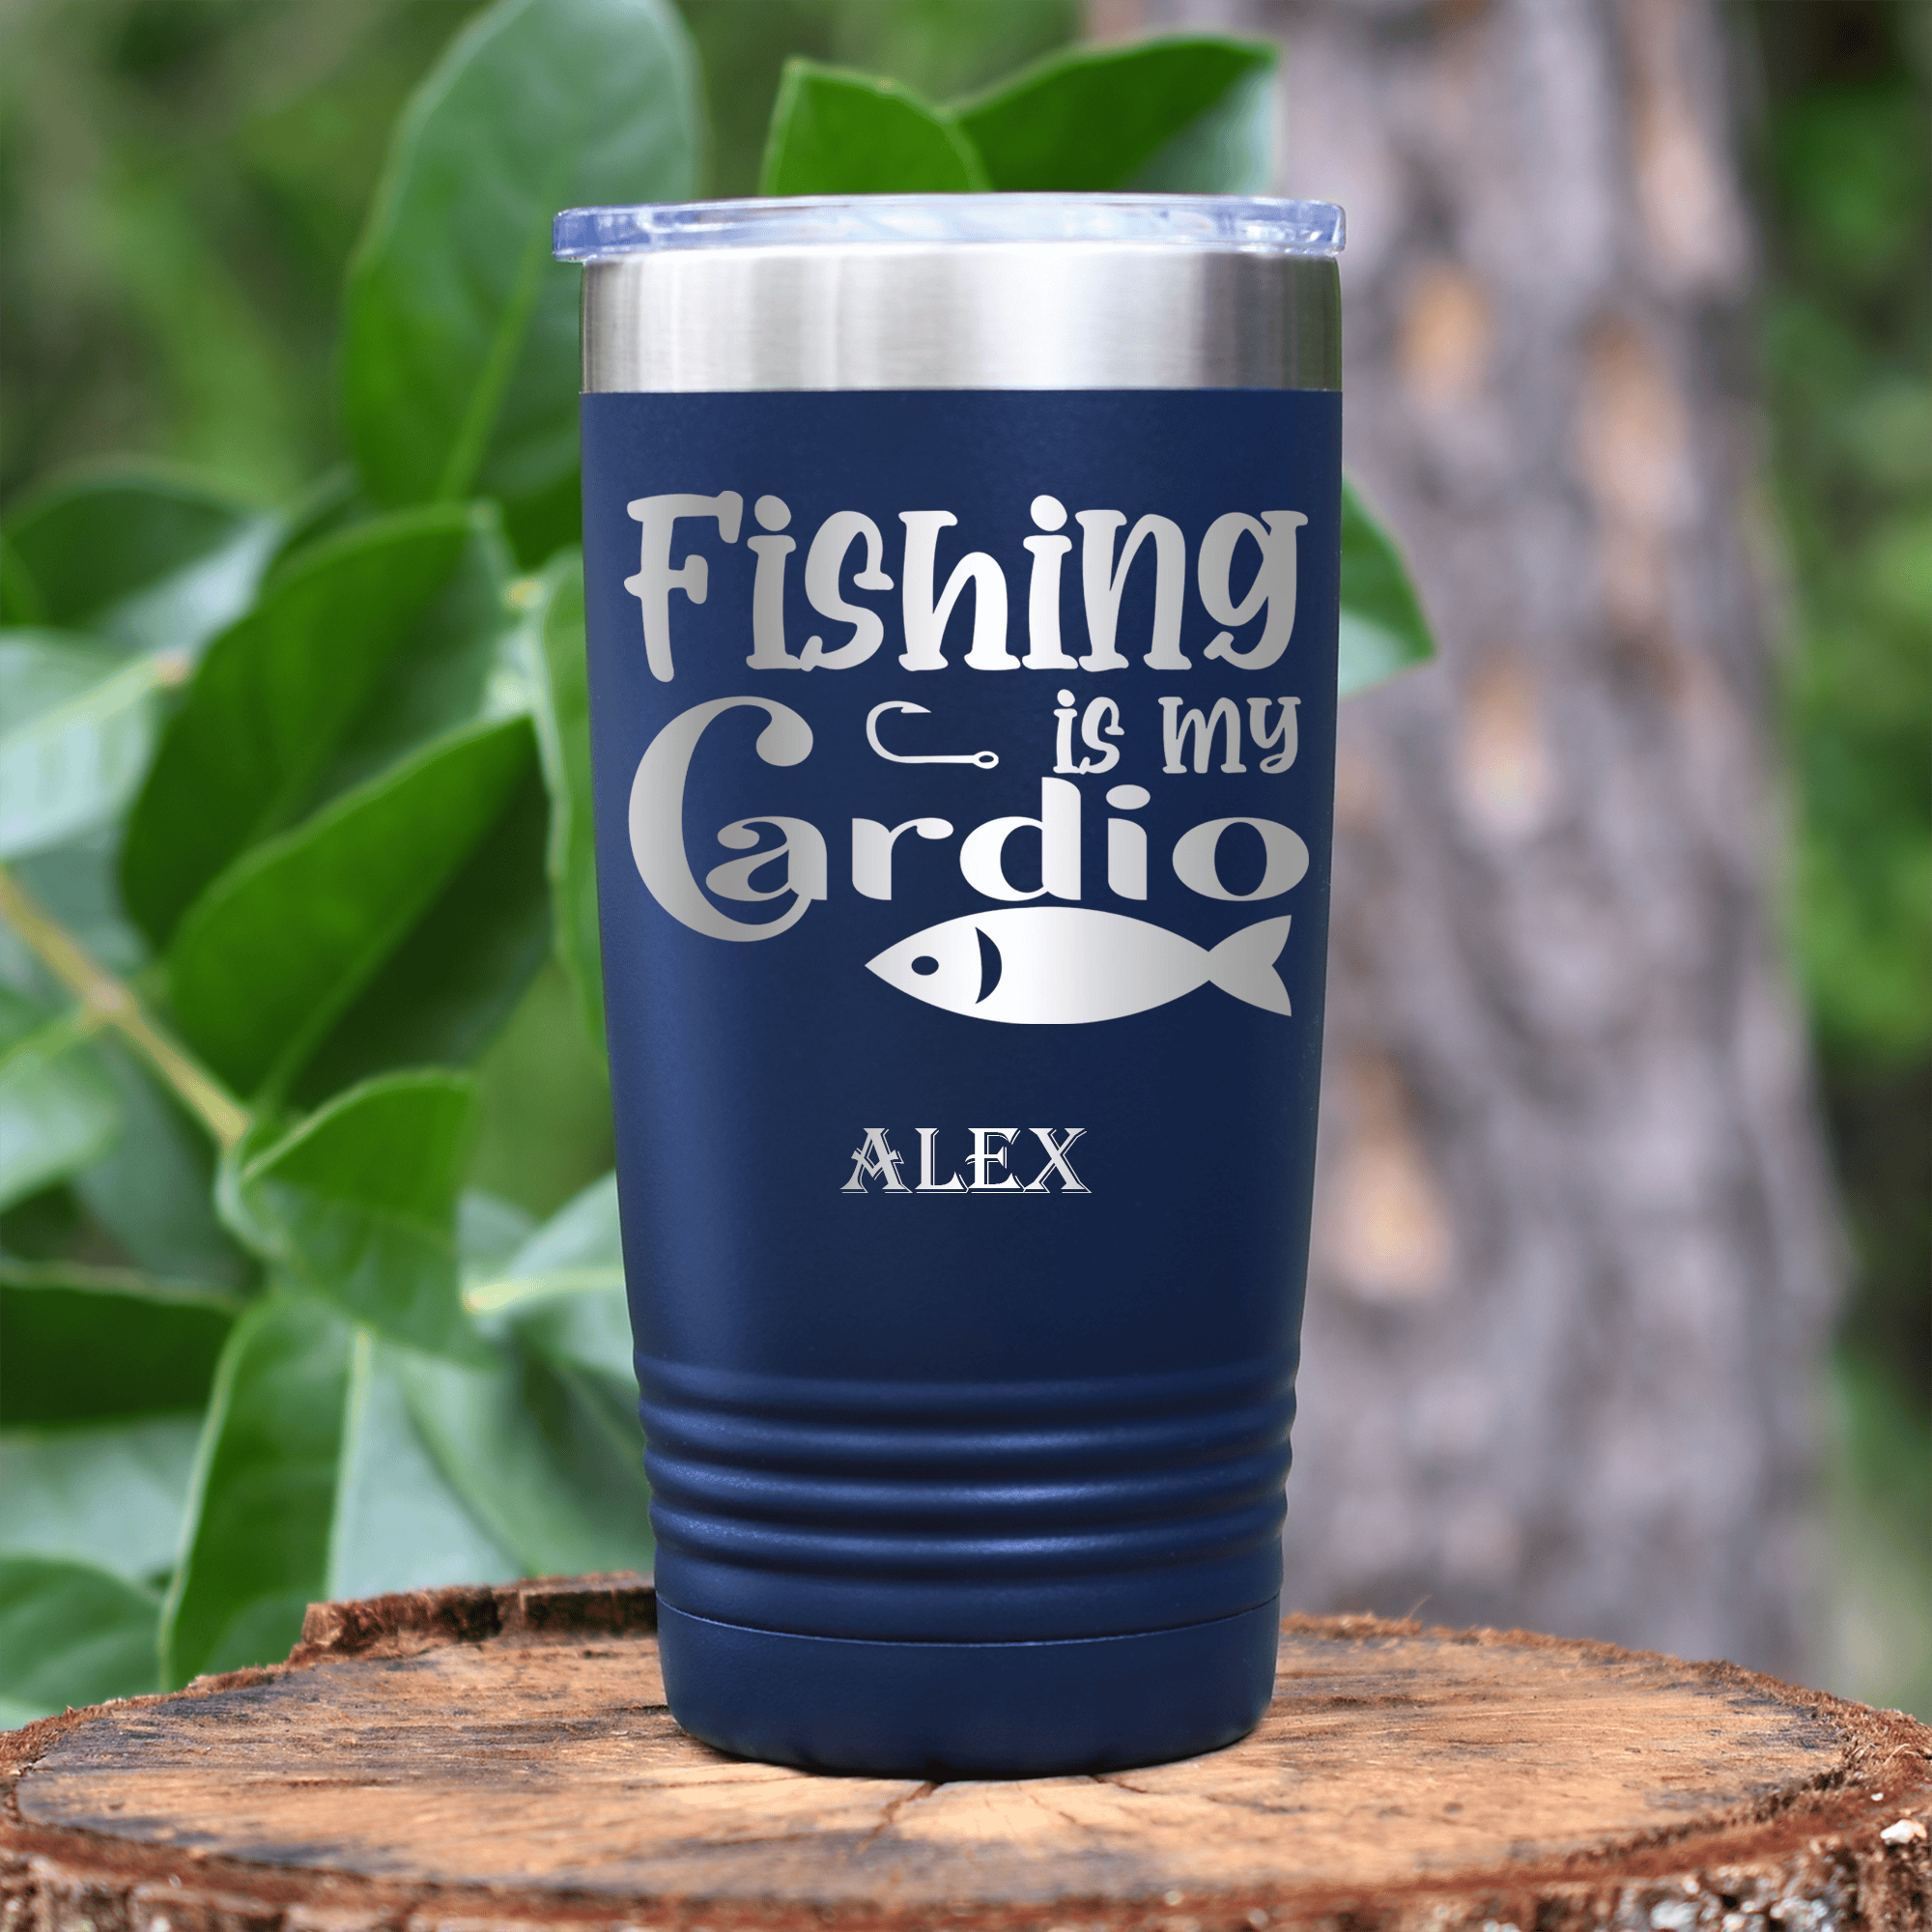 Fishing Gifts  Unique and Personalized Ideas - Groovy Guy Gifts